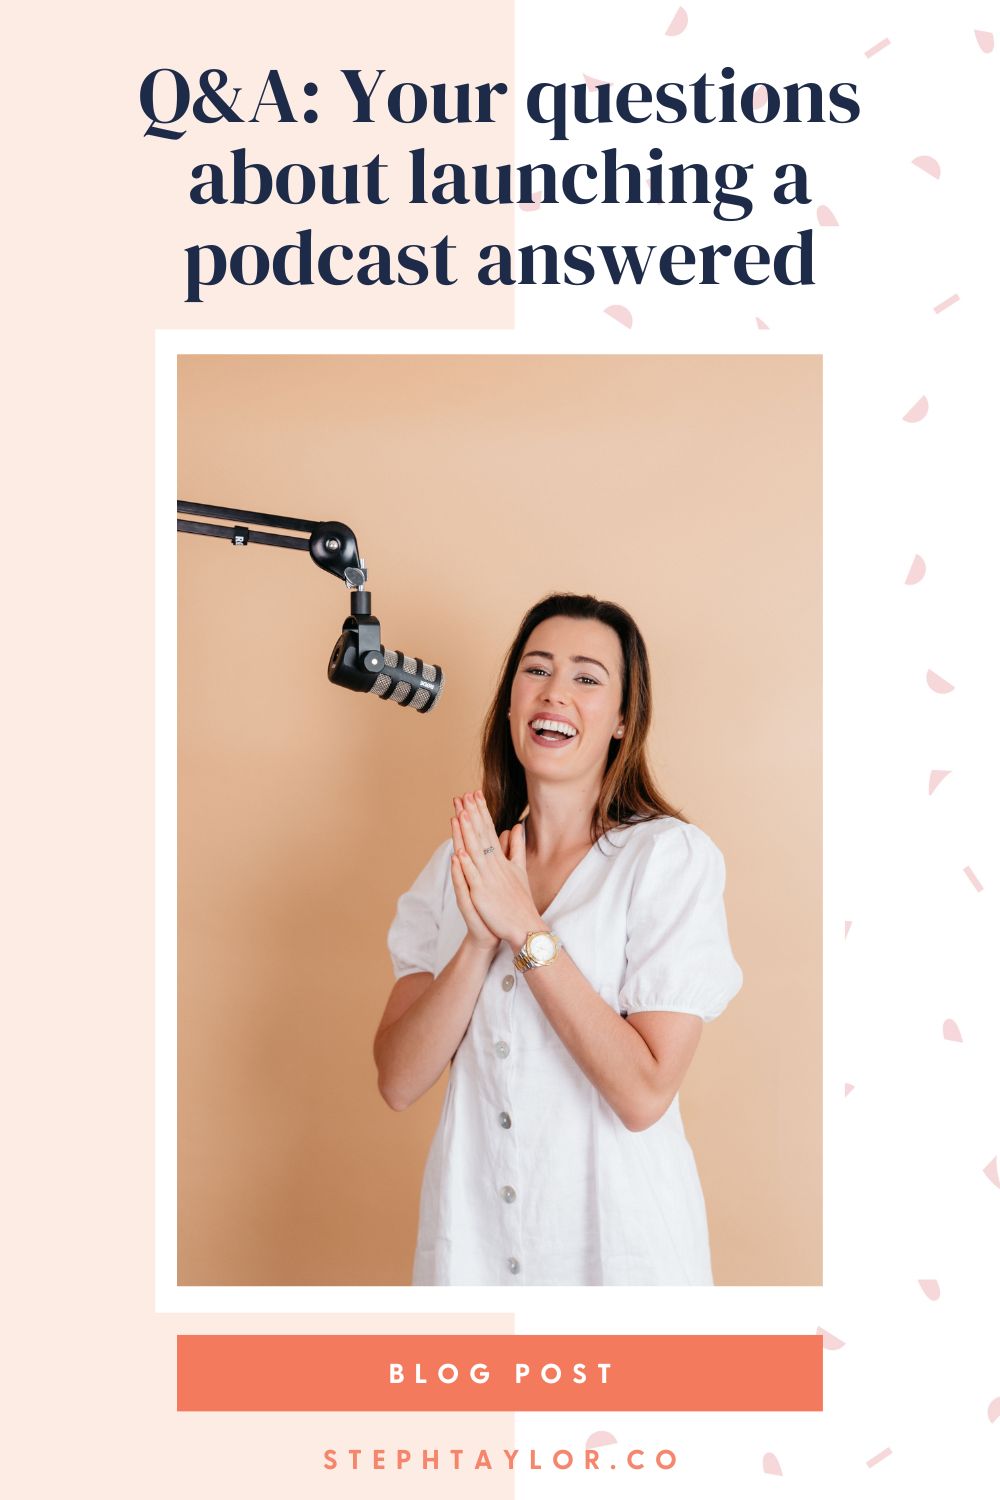 Q&A: Your questions about launching a podcast answered